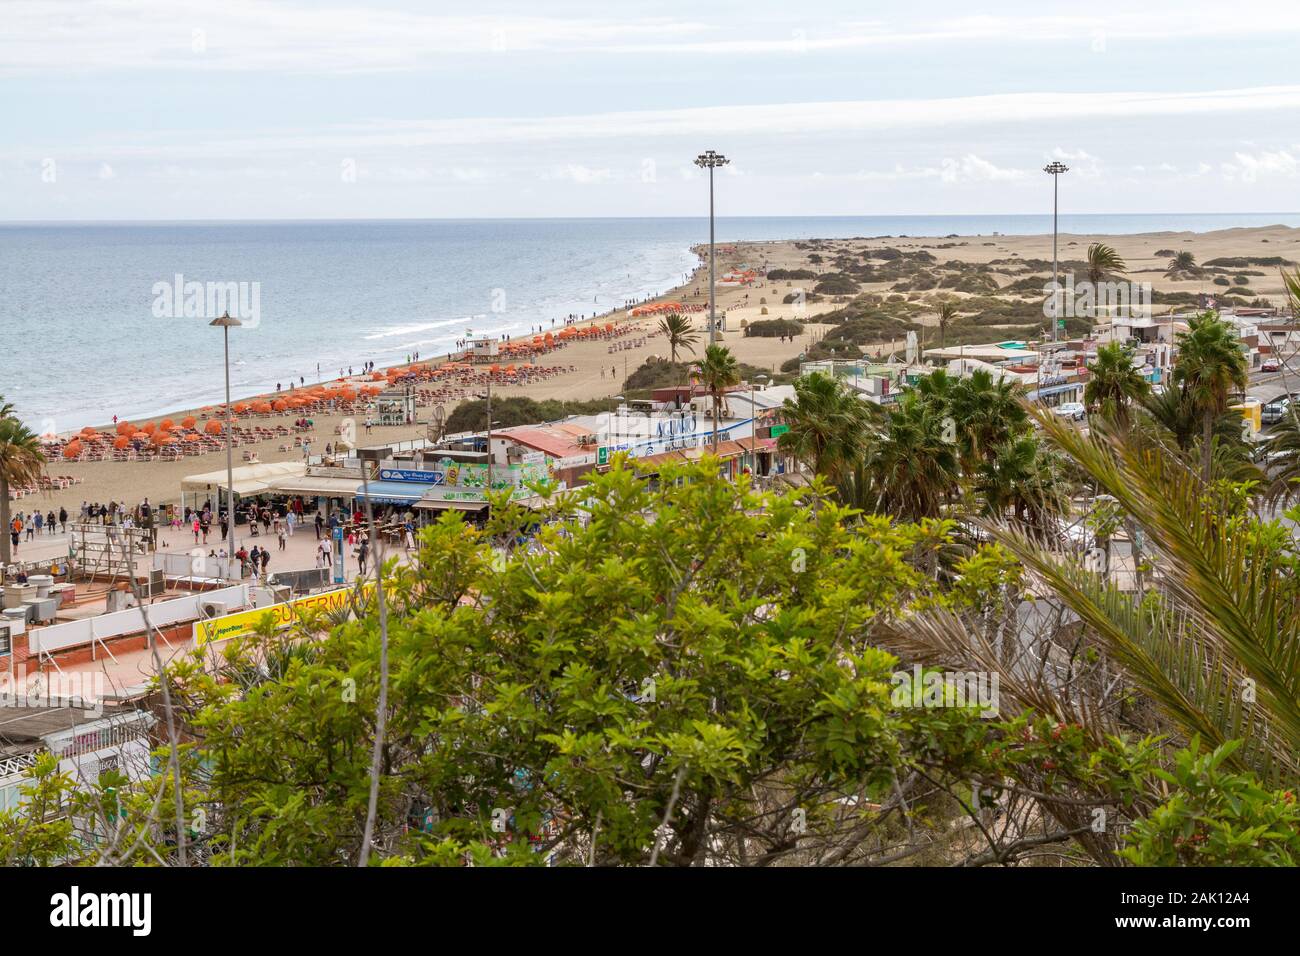 View over the Playa del Ingles beach area near the dunes in Maspalomas, Gran Canaria with beach chairs and restaurants visible Stock Photo